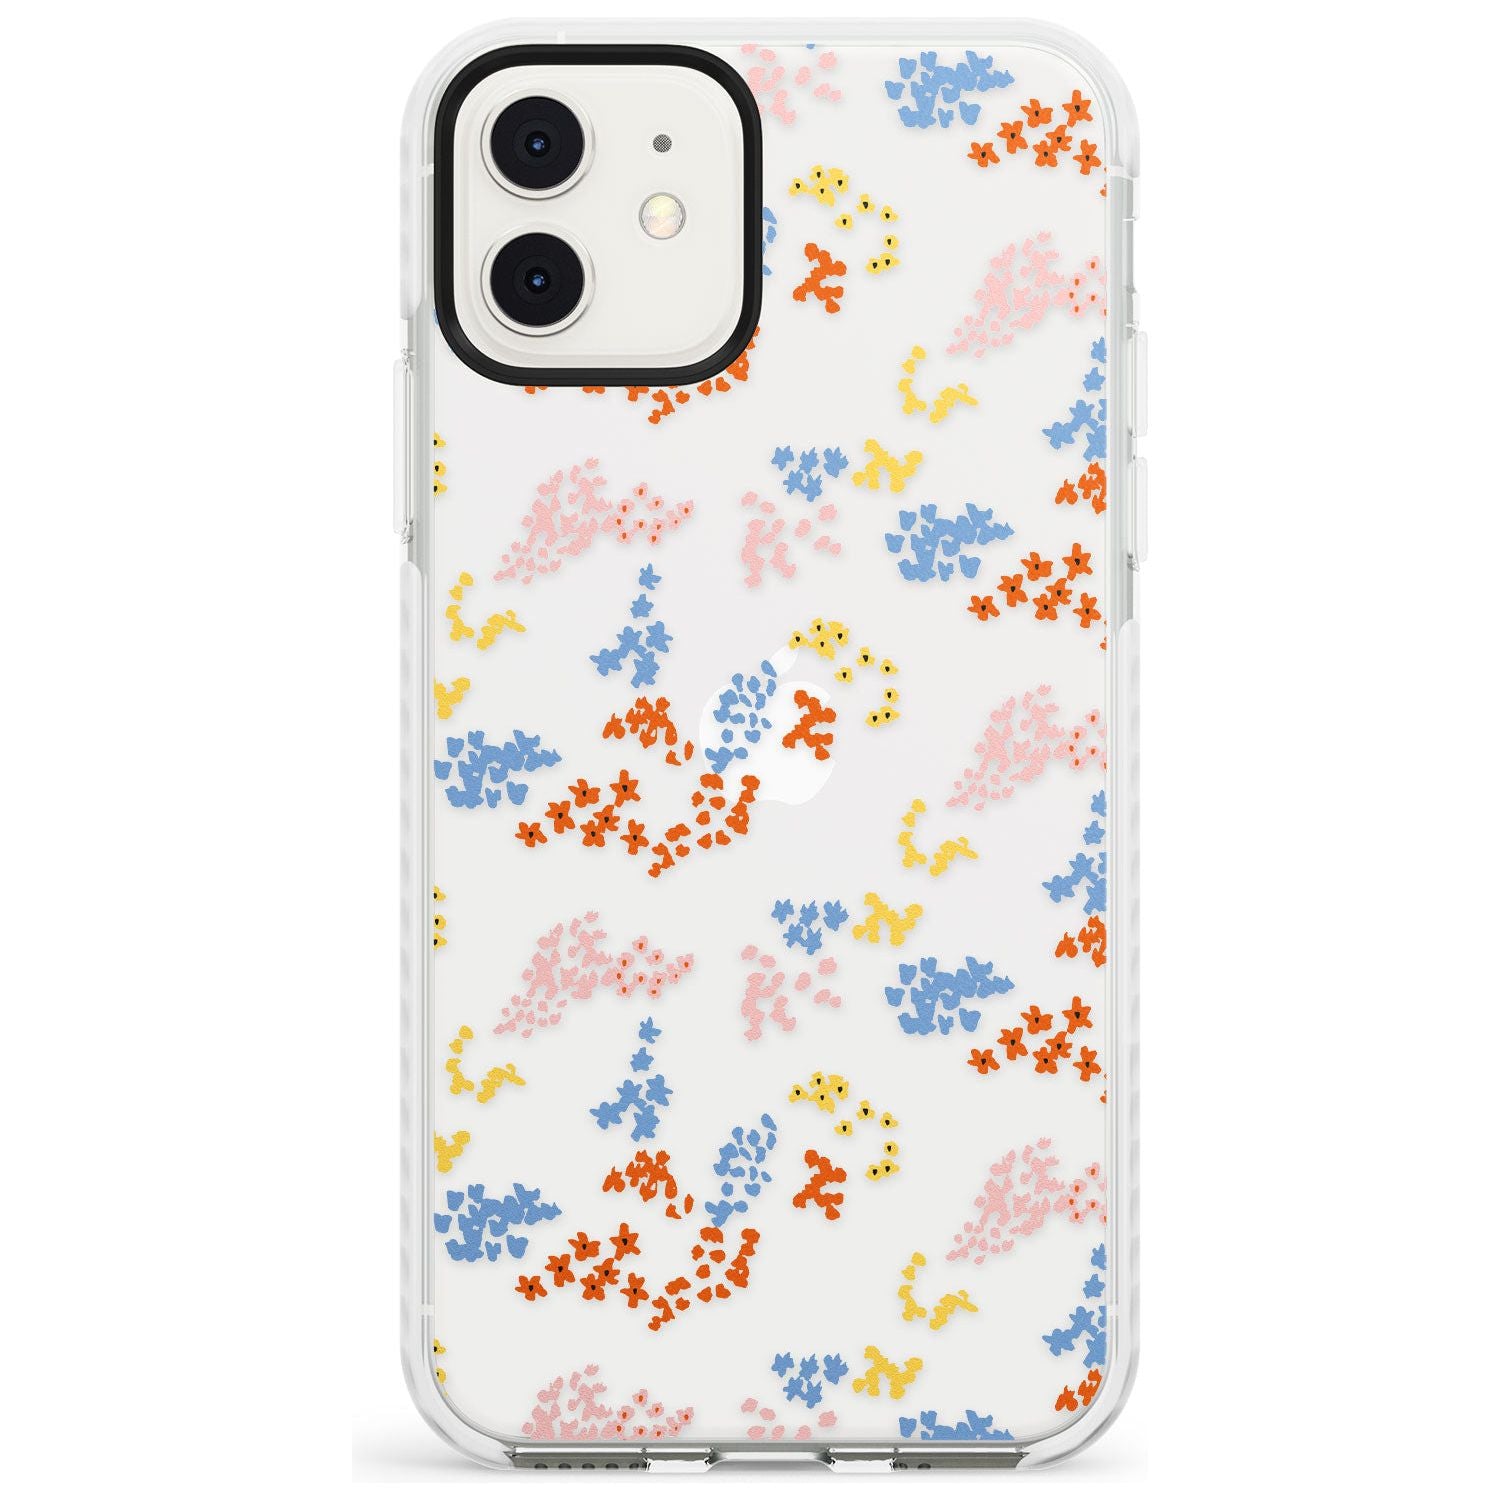 Small Flower Mix: Transparent Slim TPU Phone Case for iPhone 11